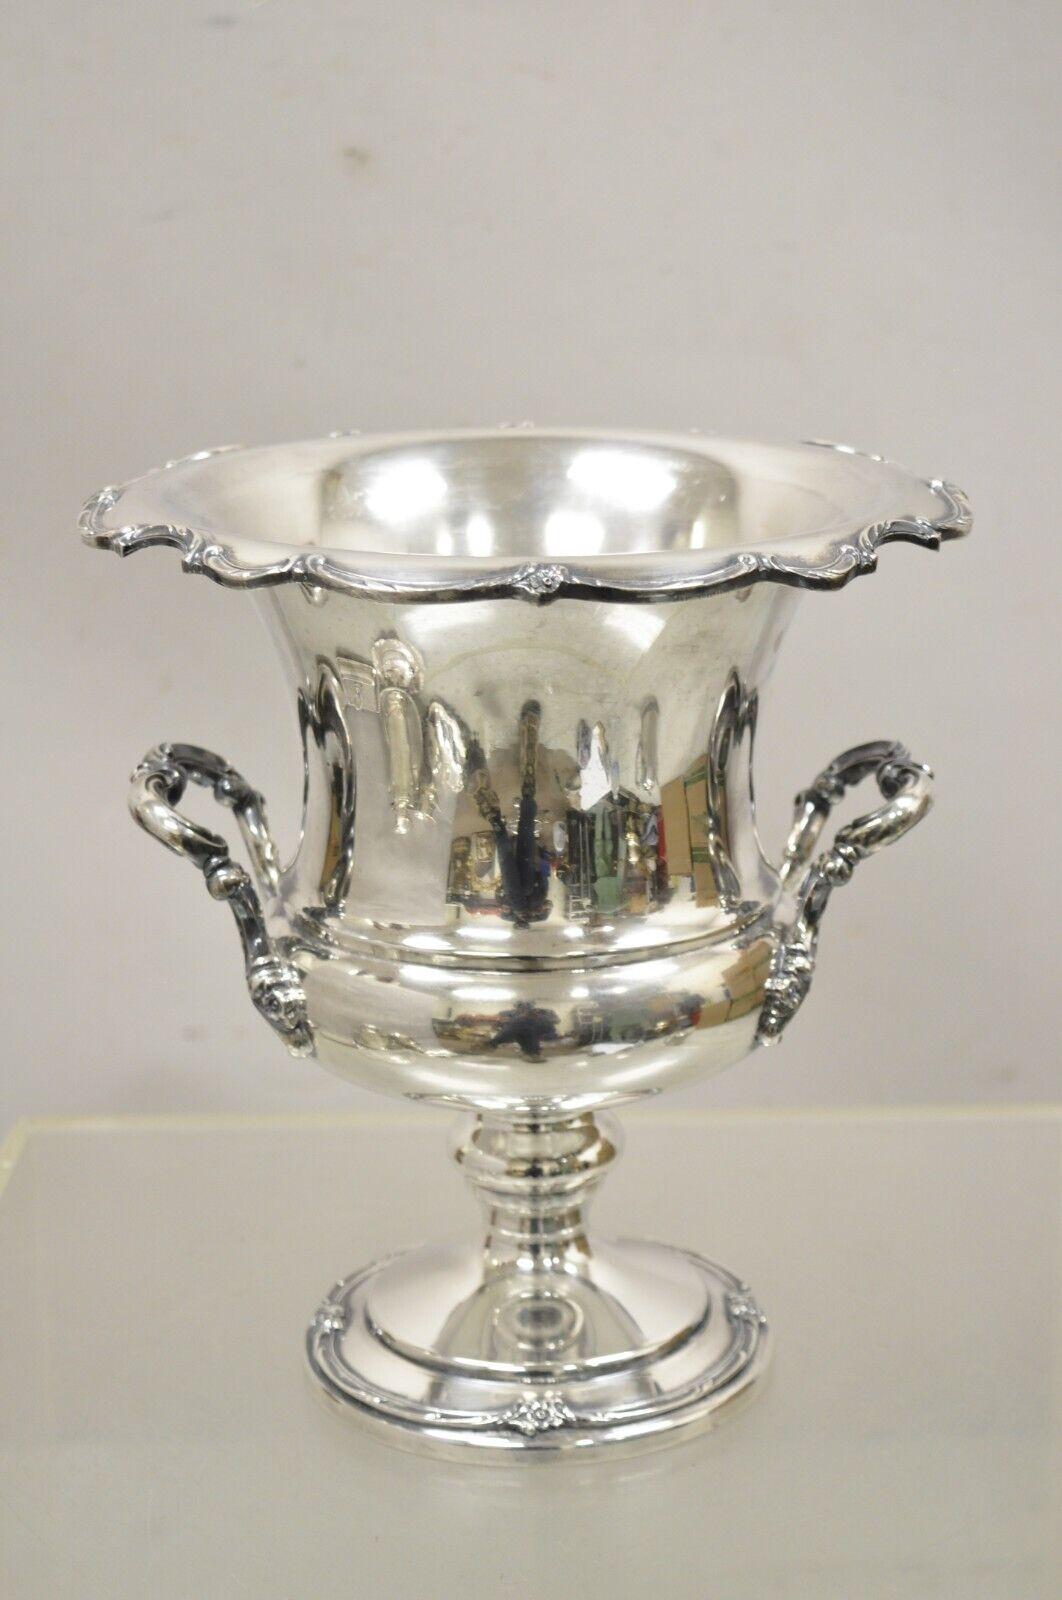 Vintage Reflection 1847 Rogers Bros Silver Plated Trophy Cup Champagne Chiller Ice Bucket. Item features a nice tall form, raised pedestal base, original hallmark, very nice vintage item, great style and form. Circa Mid to Late 20th Century.